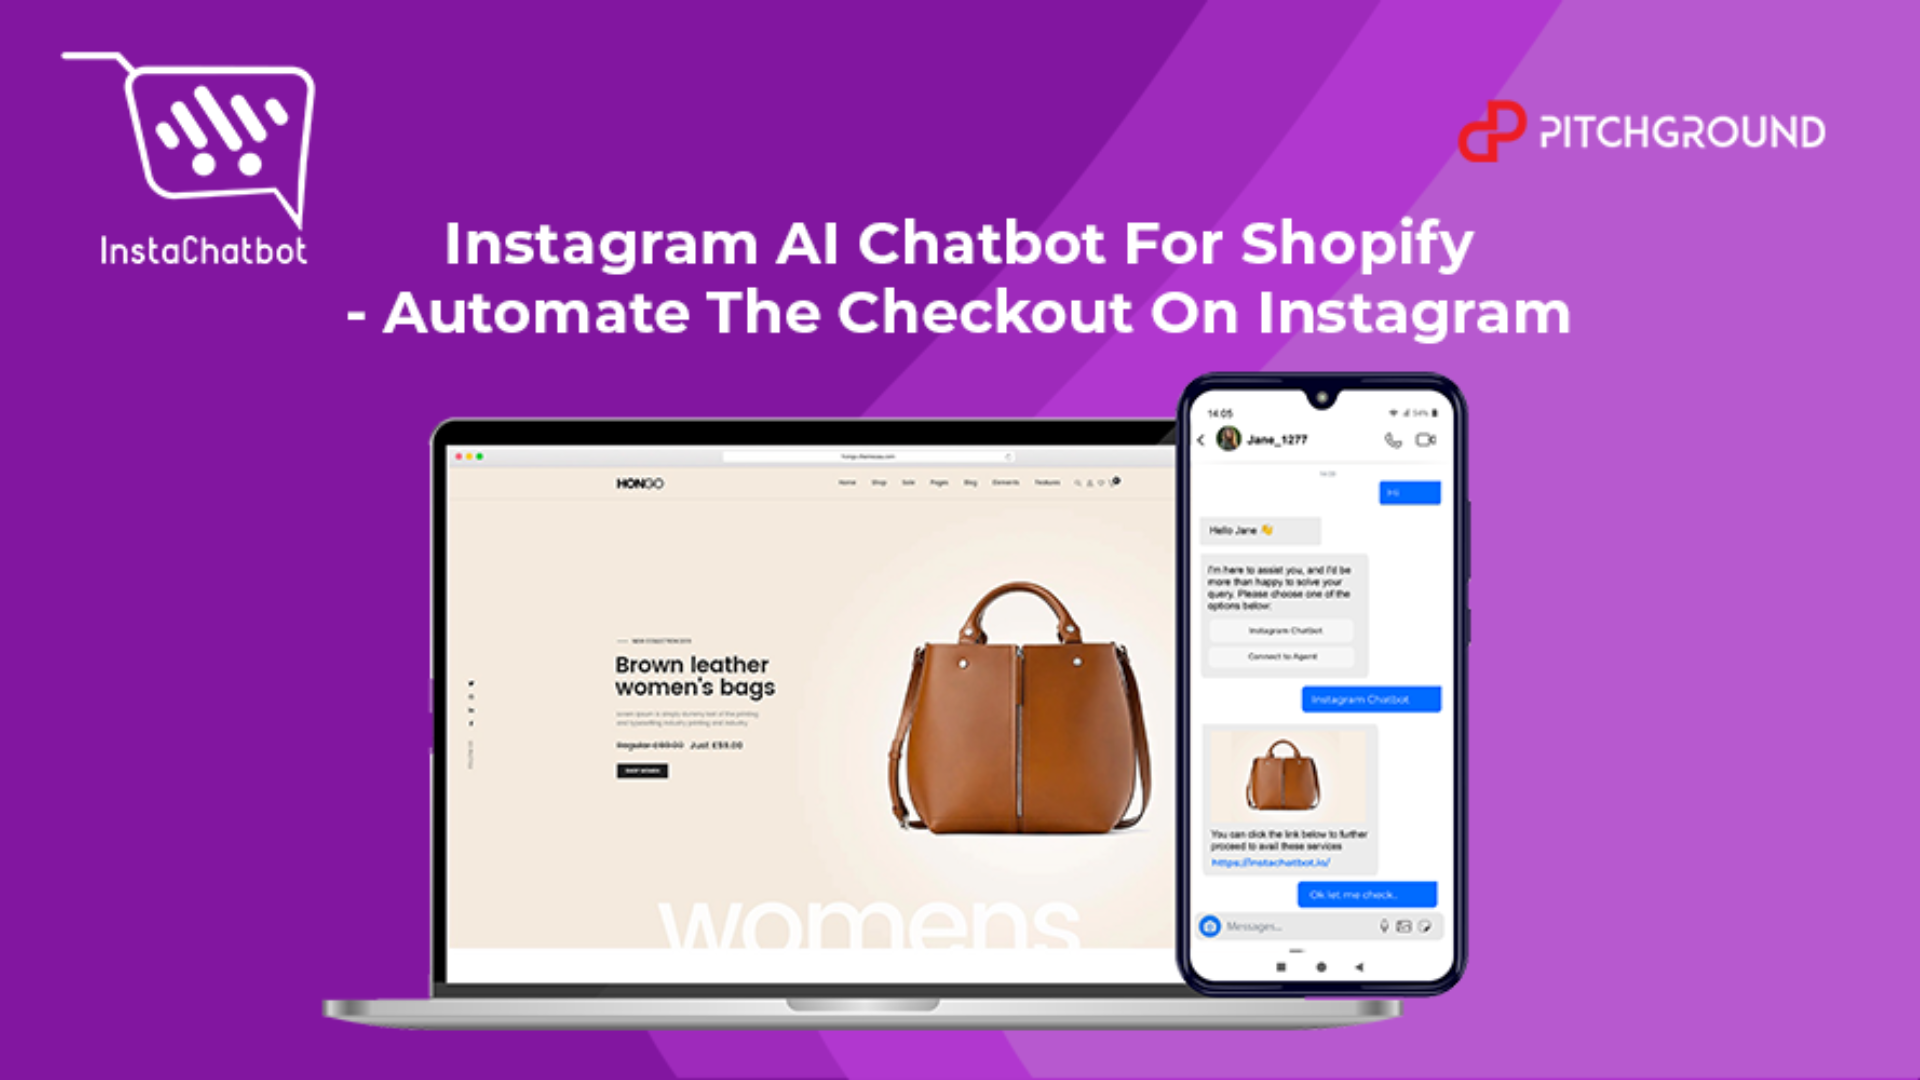 Lifetime Deal to Instachatbot: Plan D for $297